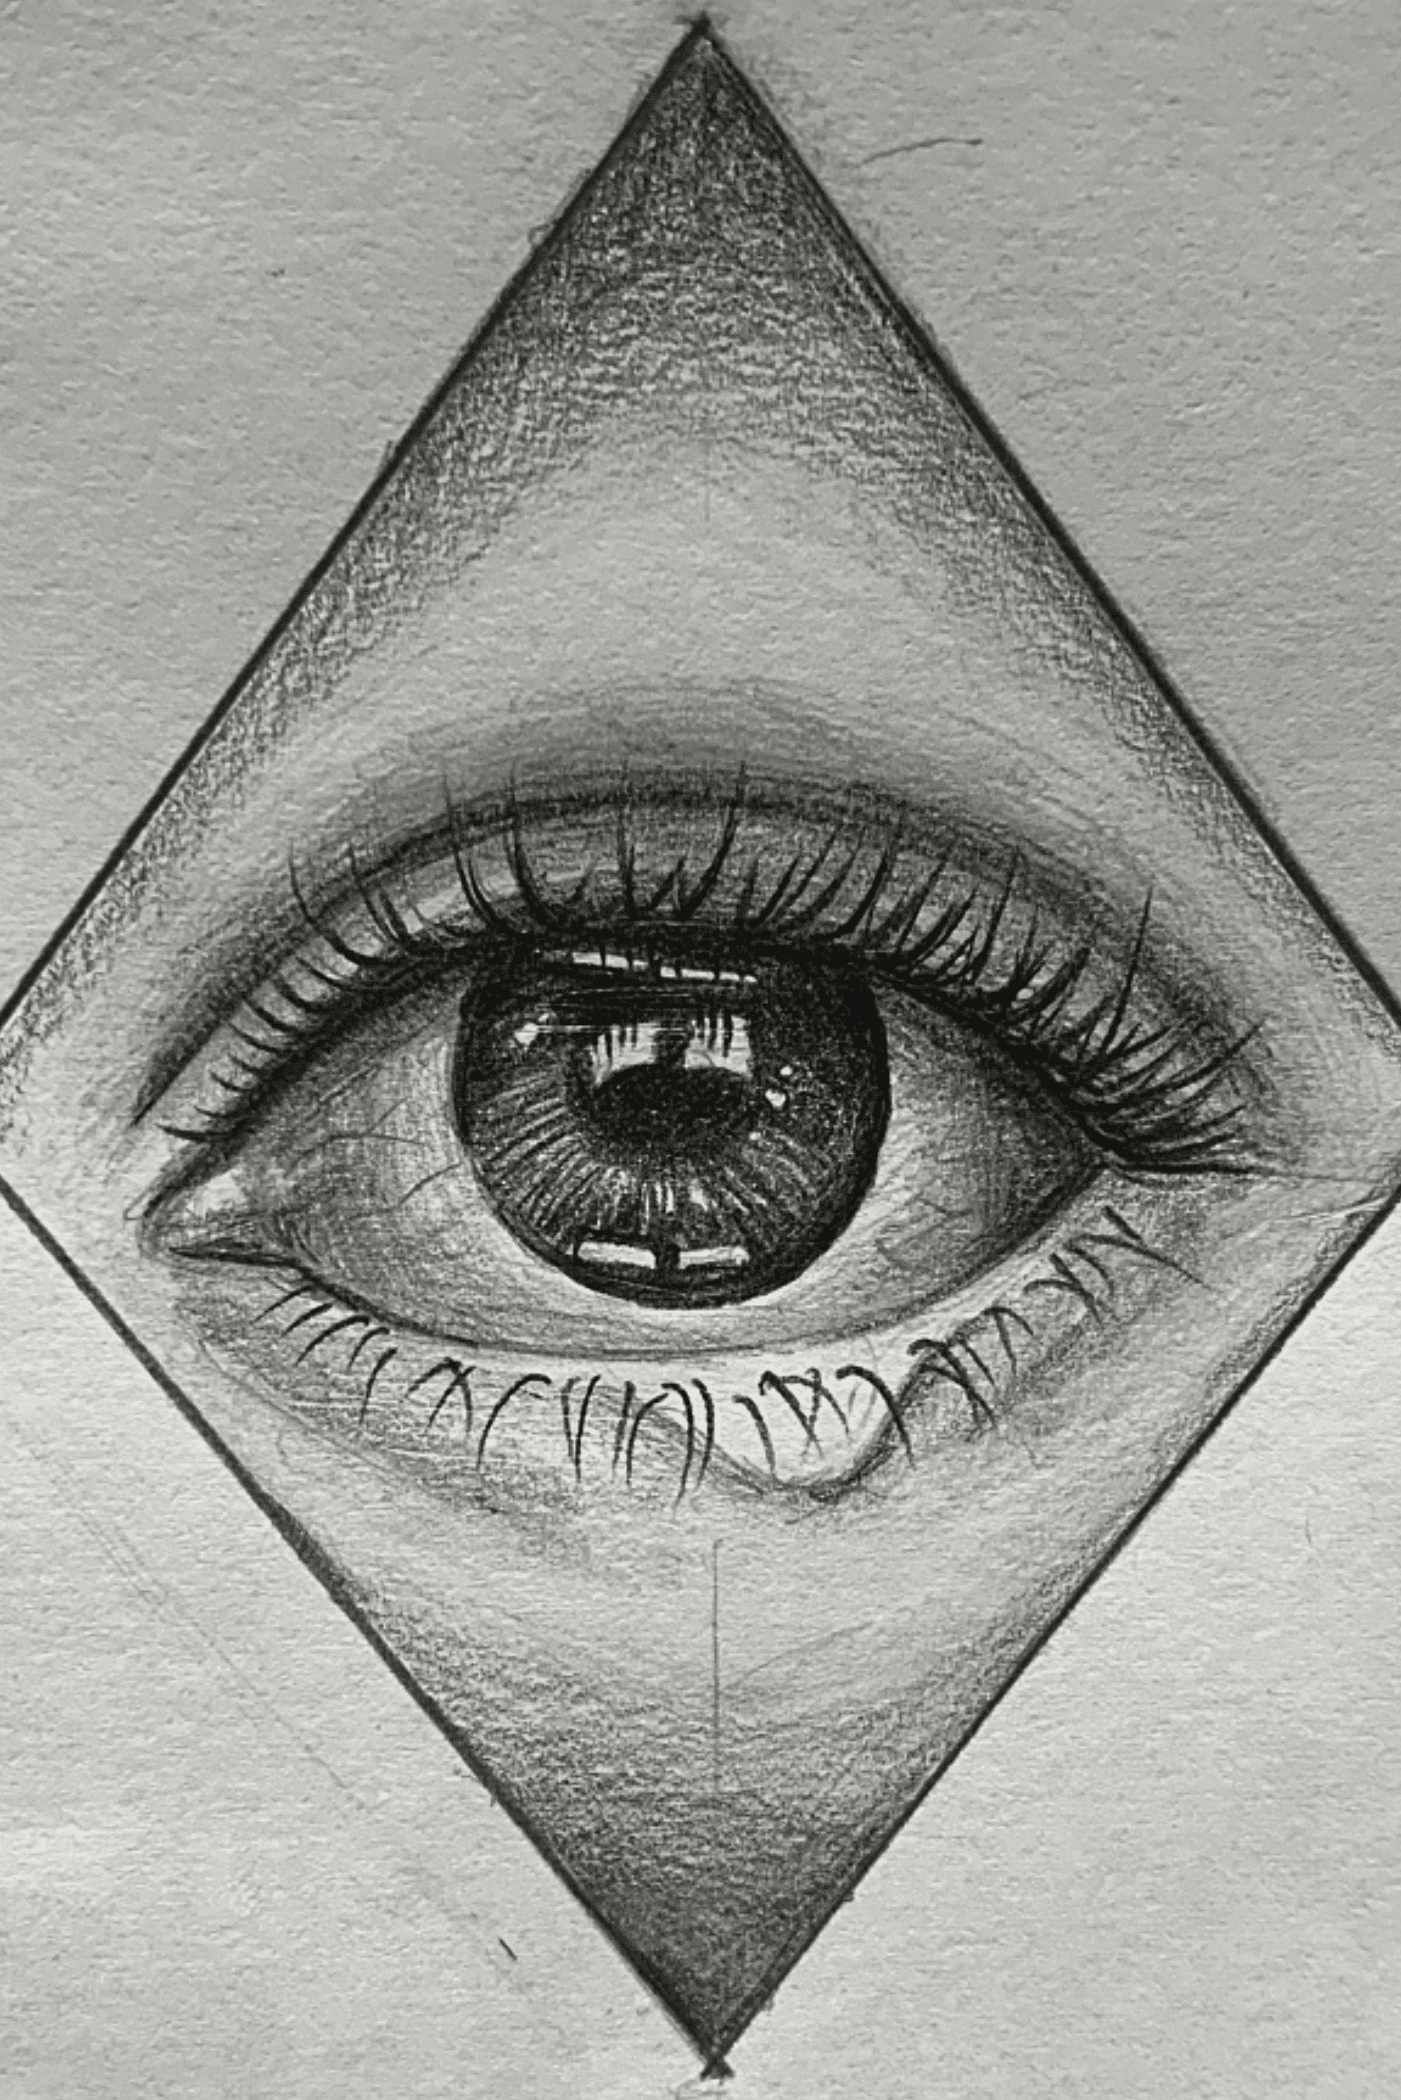 Tattoo uploaded by Bella Birtalan • Realistic eye drawing . Would be happy  to tattoo it as one of my designs in offer. Message me for more details .  #eyeballtattoos #eyedrawing #realistic #